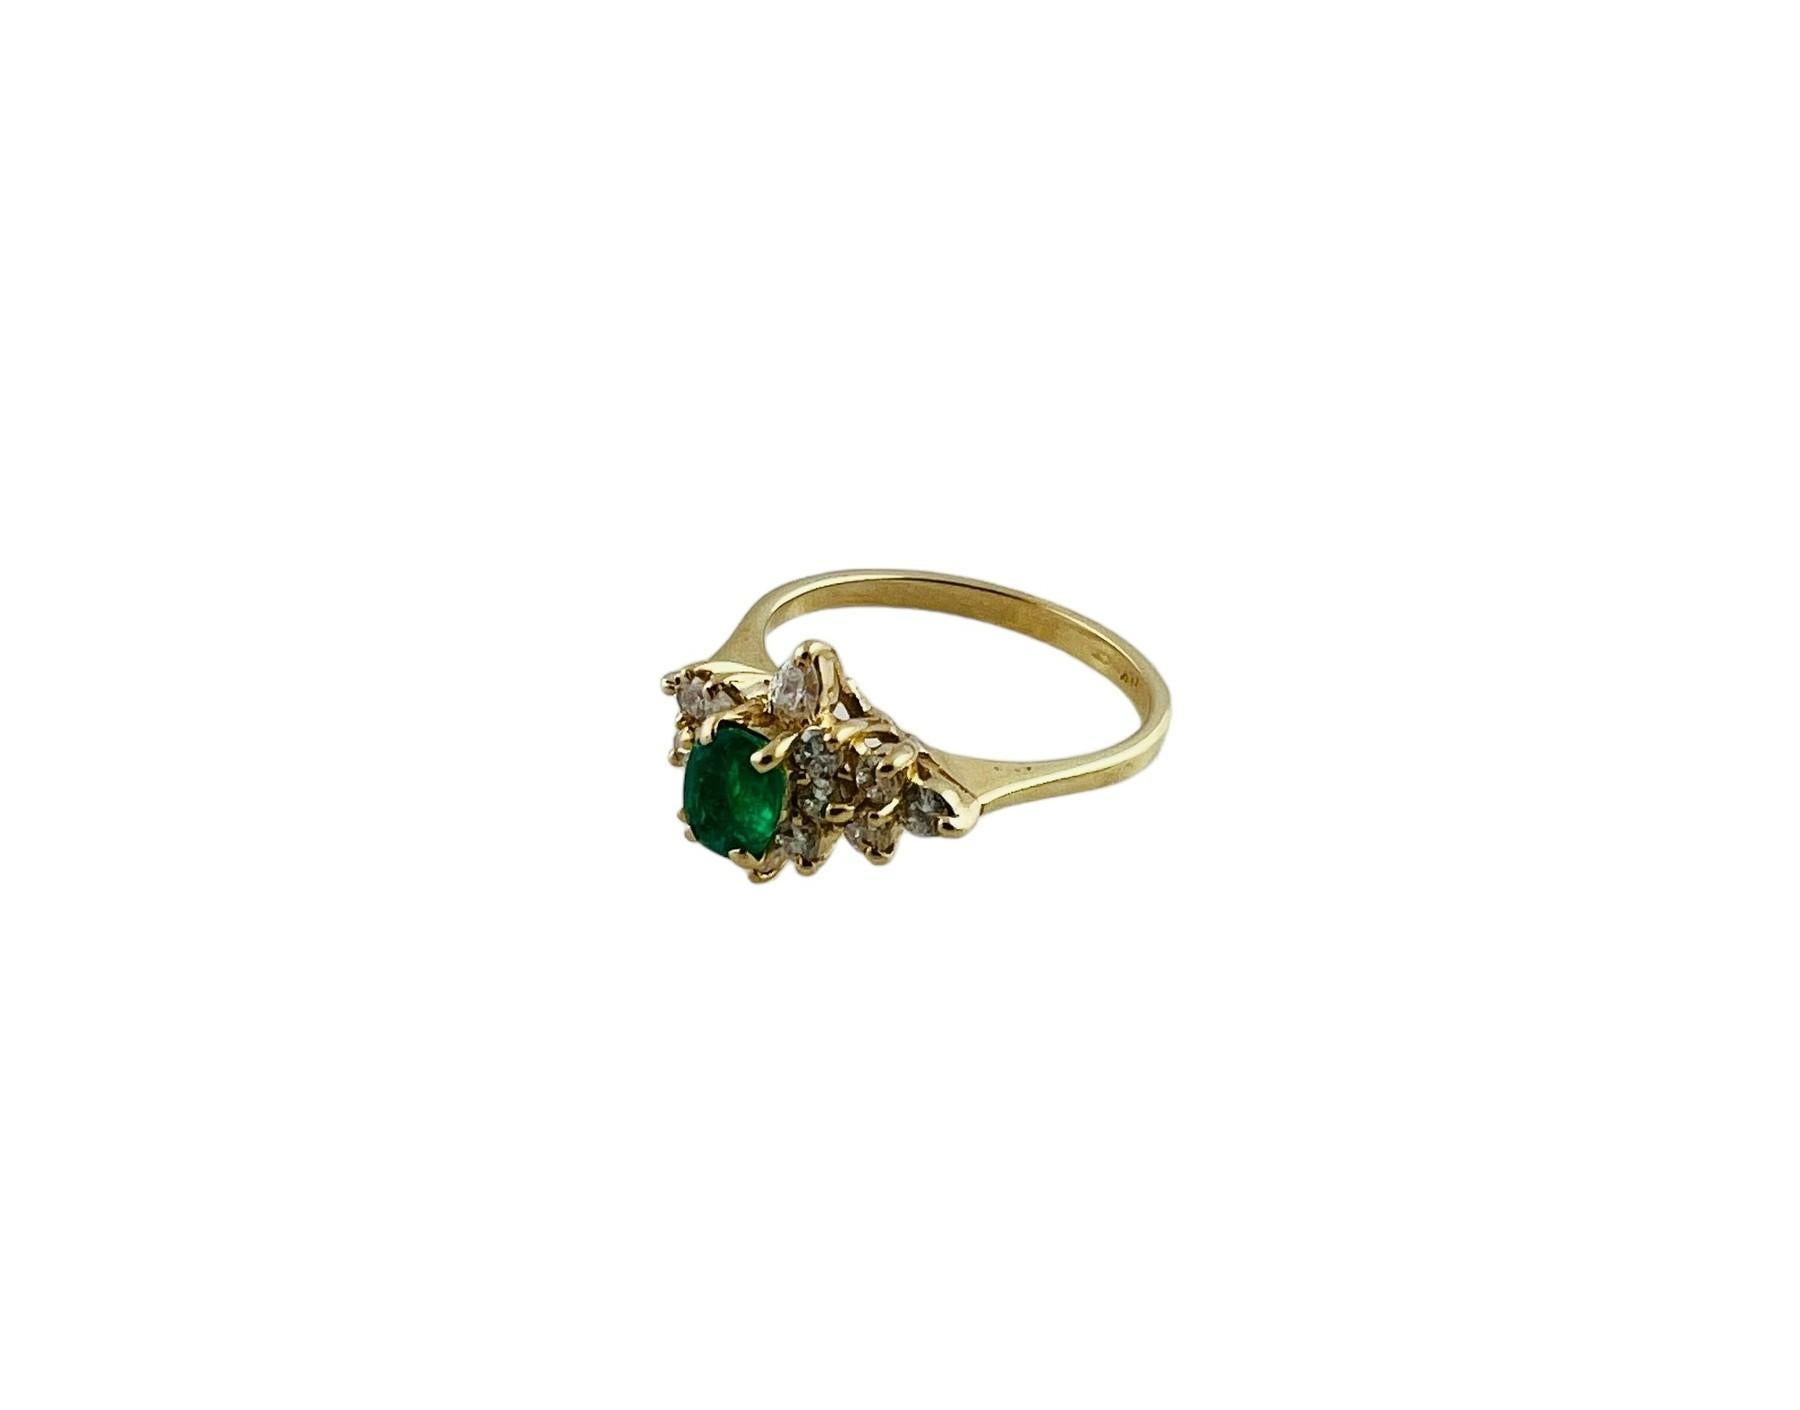 Vintage 14K Yellow Gold Diamond & Natural Emerald Cluster Ring Size 6.5

This beautiful cluster style ring is decorated to perfection with one oval shaped cut natural emerald surrounded by a cluster of 12 round brilliant and 2 pear cut diamonds for